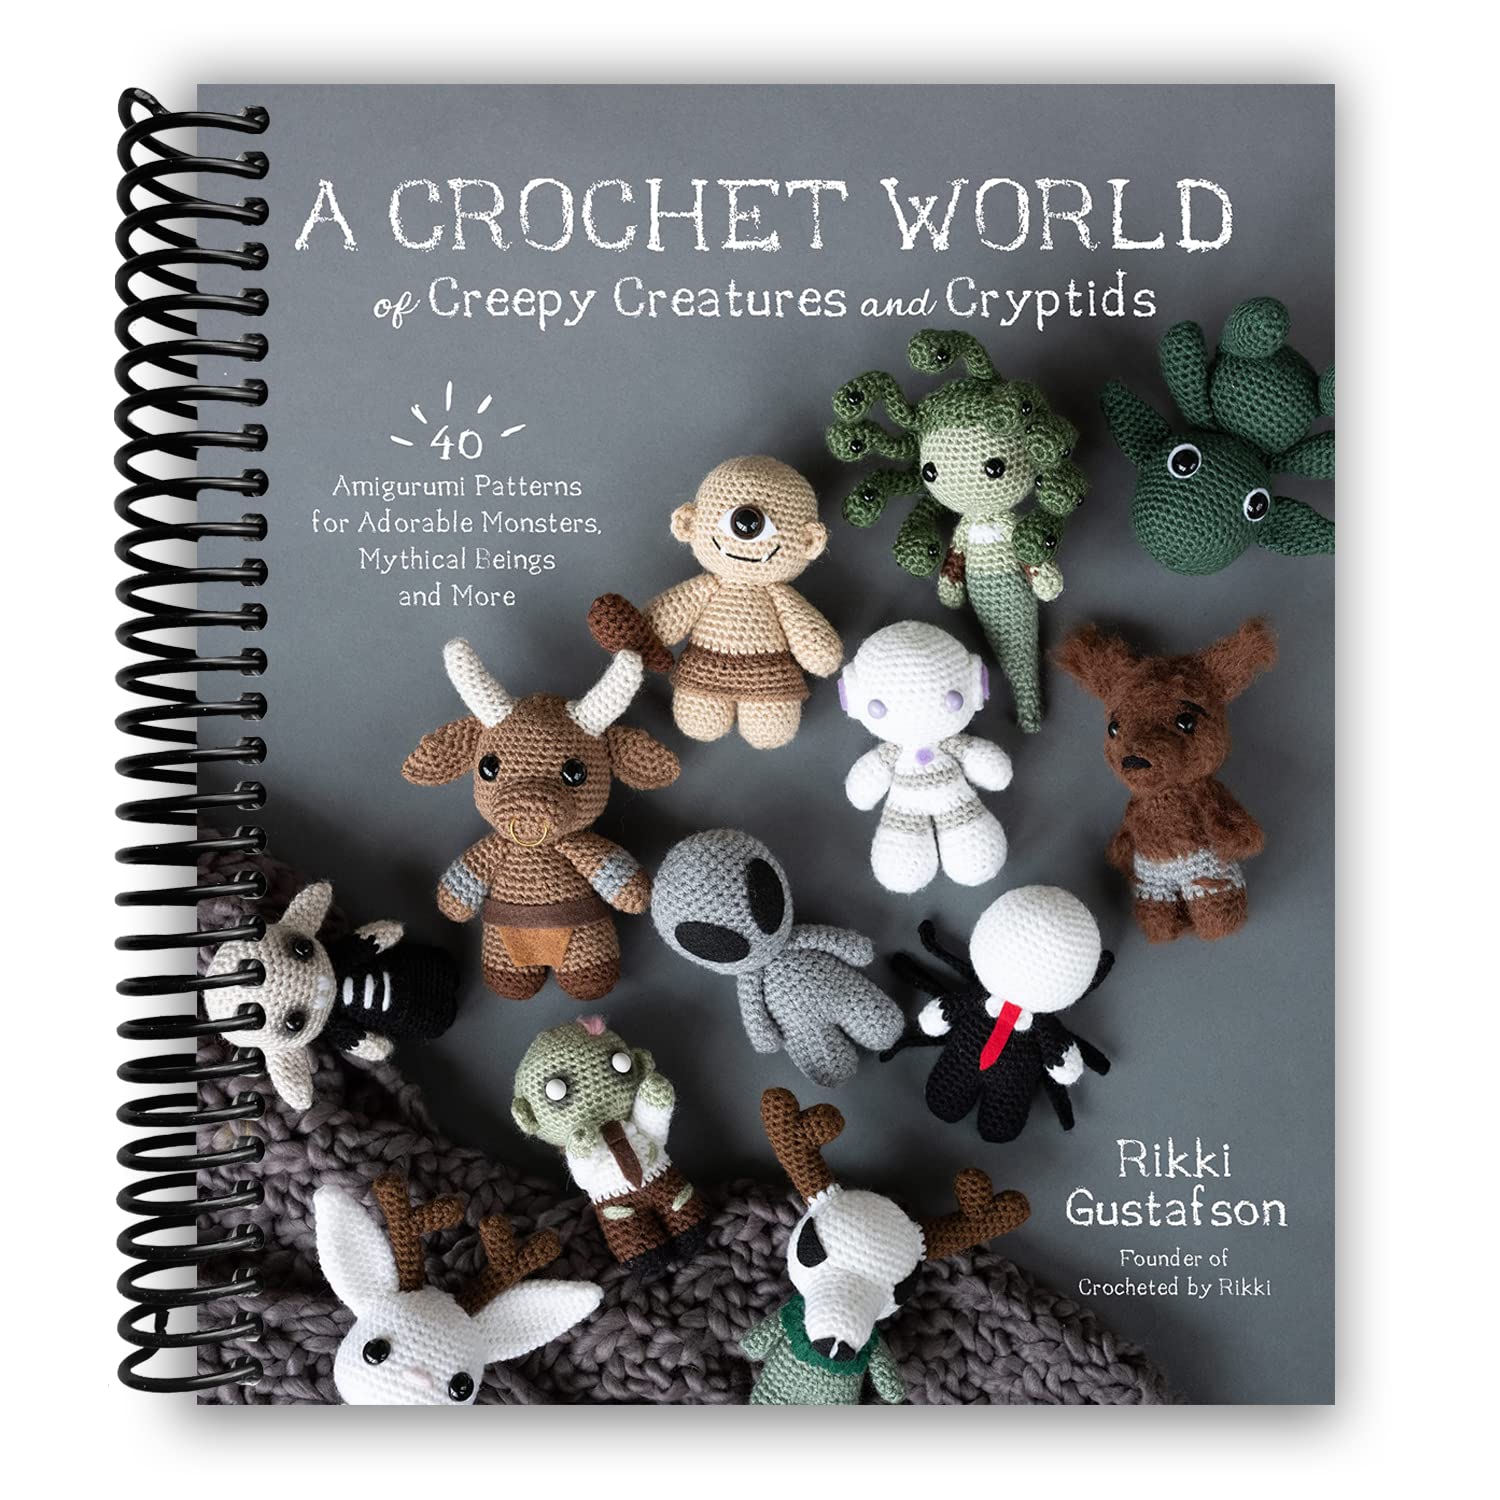 Crochet Amigurumi for Every Occasion: 21 Easy Projects to Celebrate Life's Happy Moments (The Woobles Crochet) [Book]